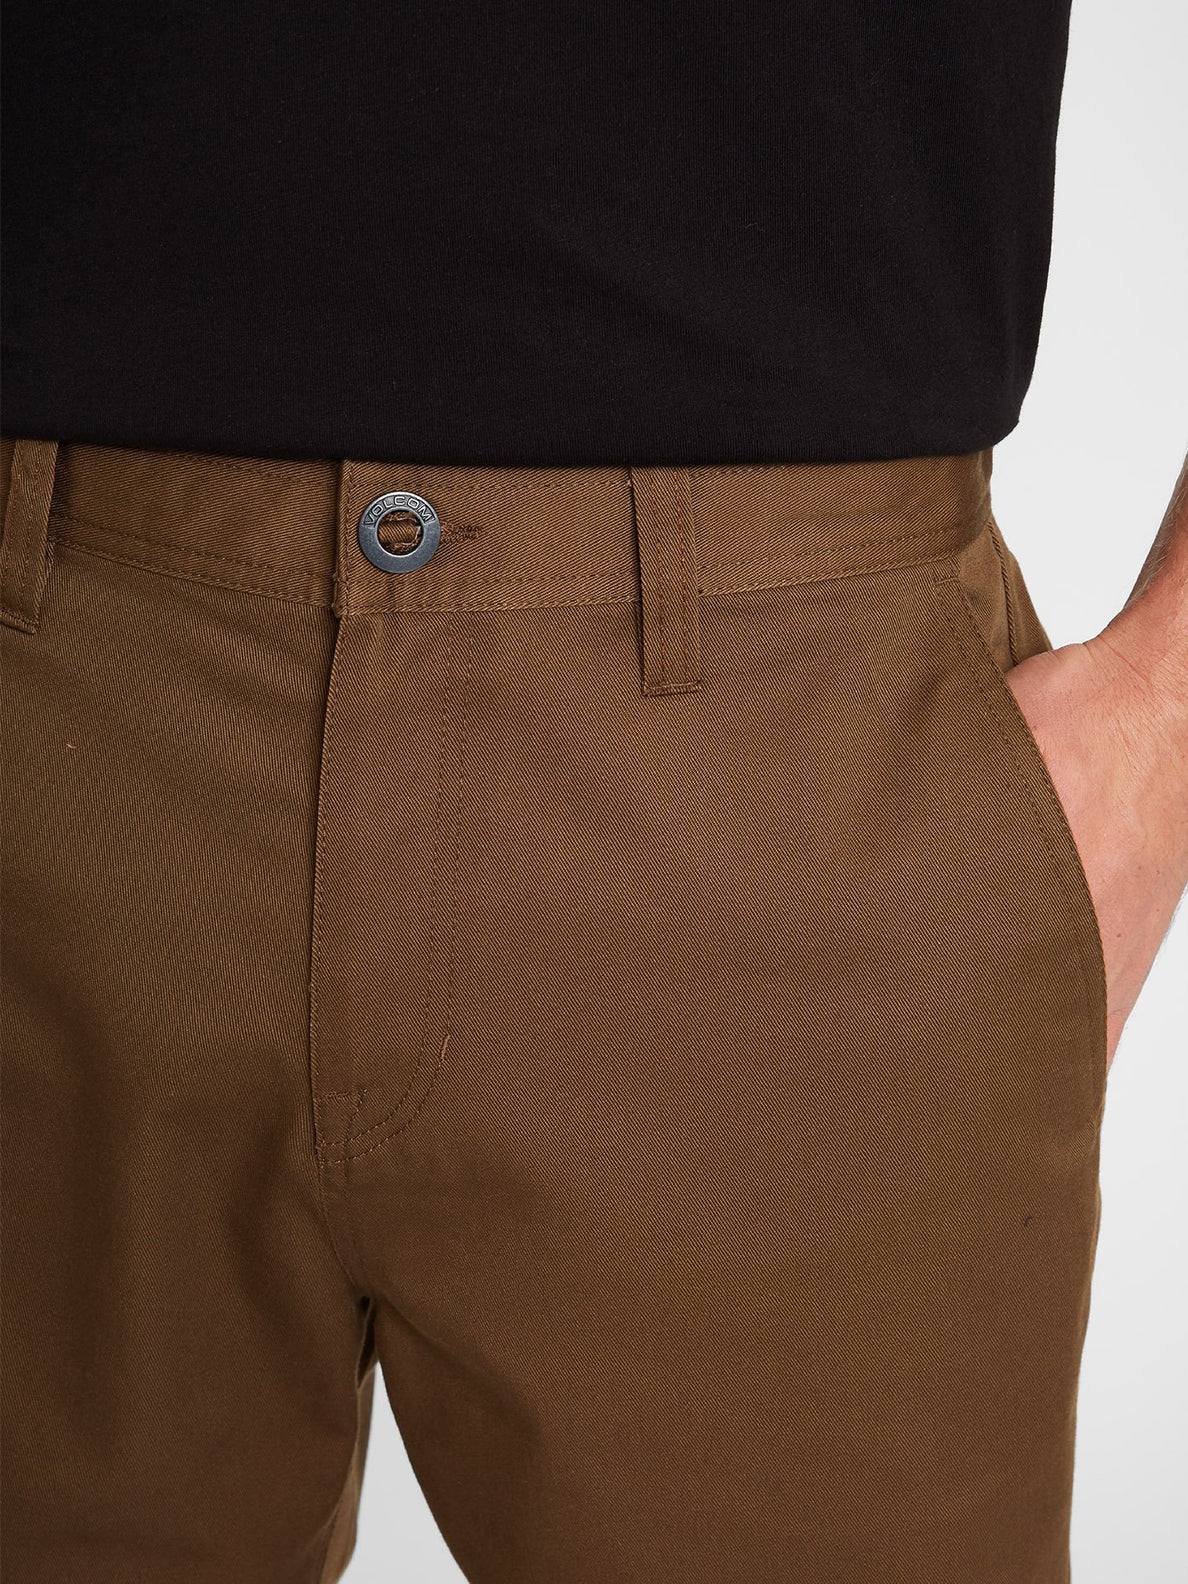 Substance Chino Pant - Vintage Brown (A1112104_VBN) [5]